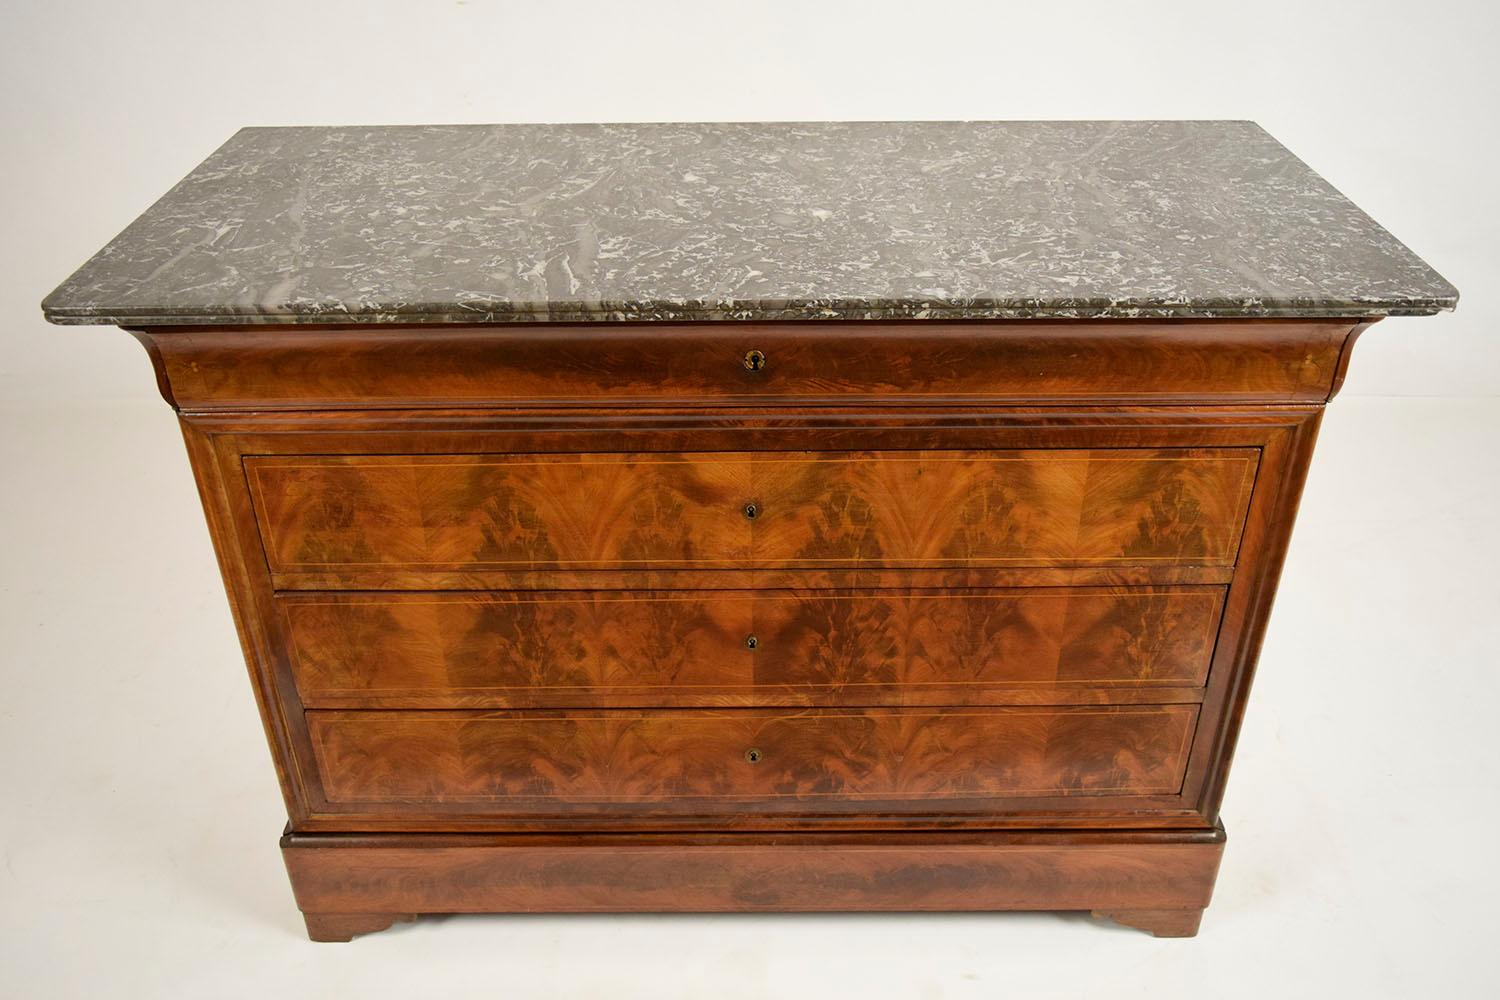 This 1830s French Louis Philippe-style chest of drawers is made from solid mahogany wood with its original stain finish. There are four drawers full size drawers that open with a lock and key. The chest is topped with a bevelled edge marble top in a